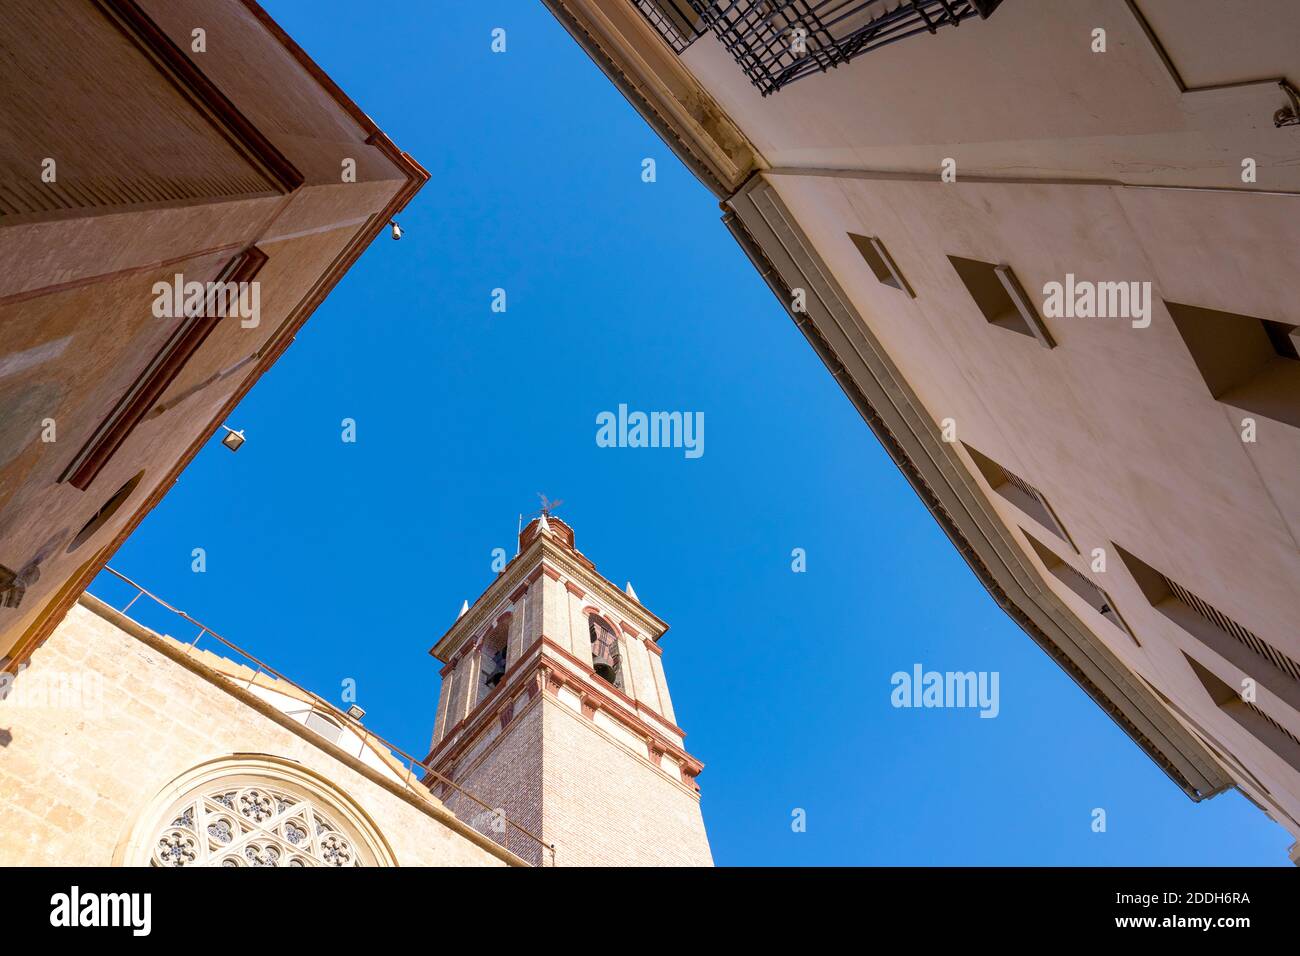 Street of the southern city on the Mediterranean coast Stock Photo